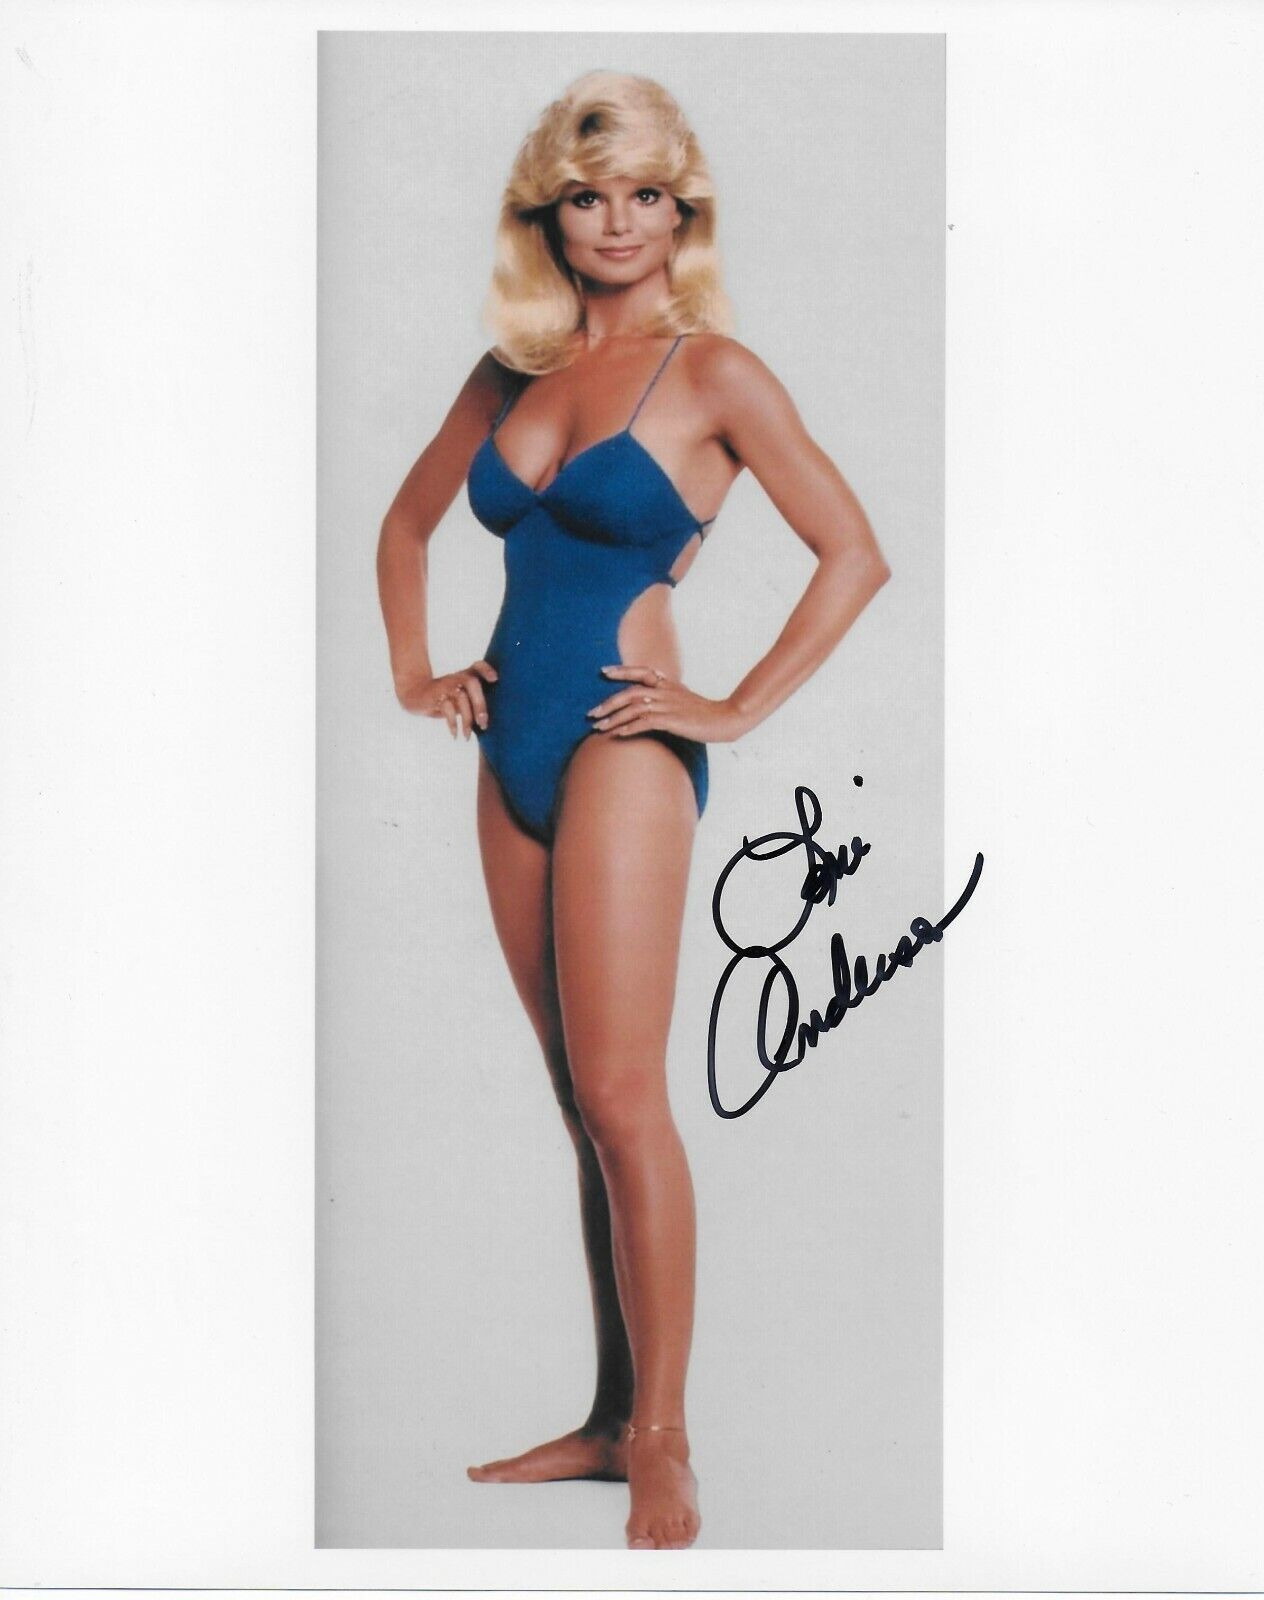 Loni Anderson Signed 8x10 Photo Poster painting - WKRP in Cincinnati BABE - GORGEOUS!!! #16